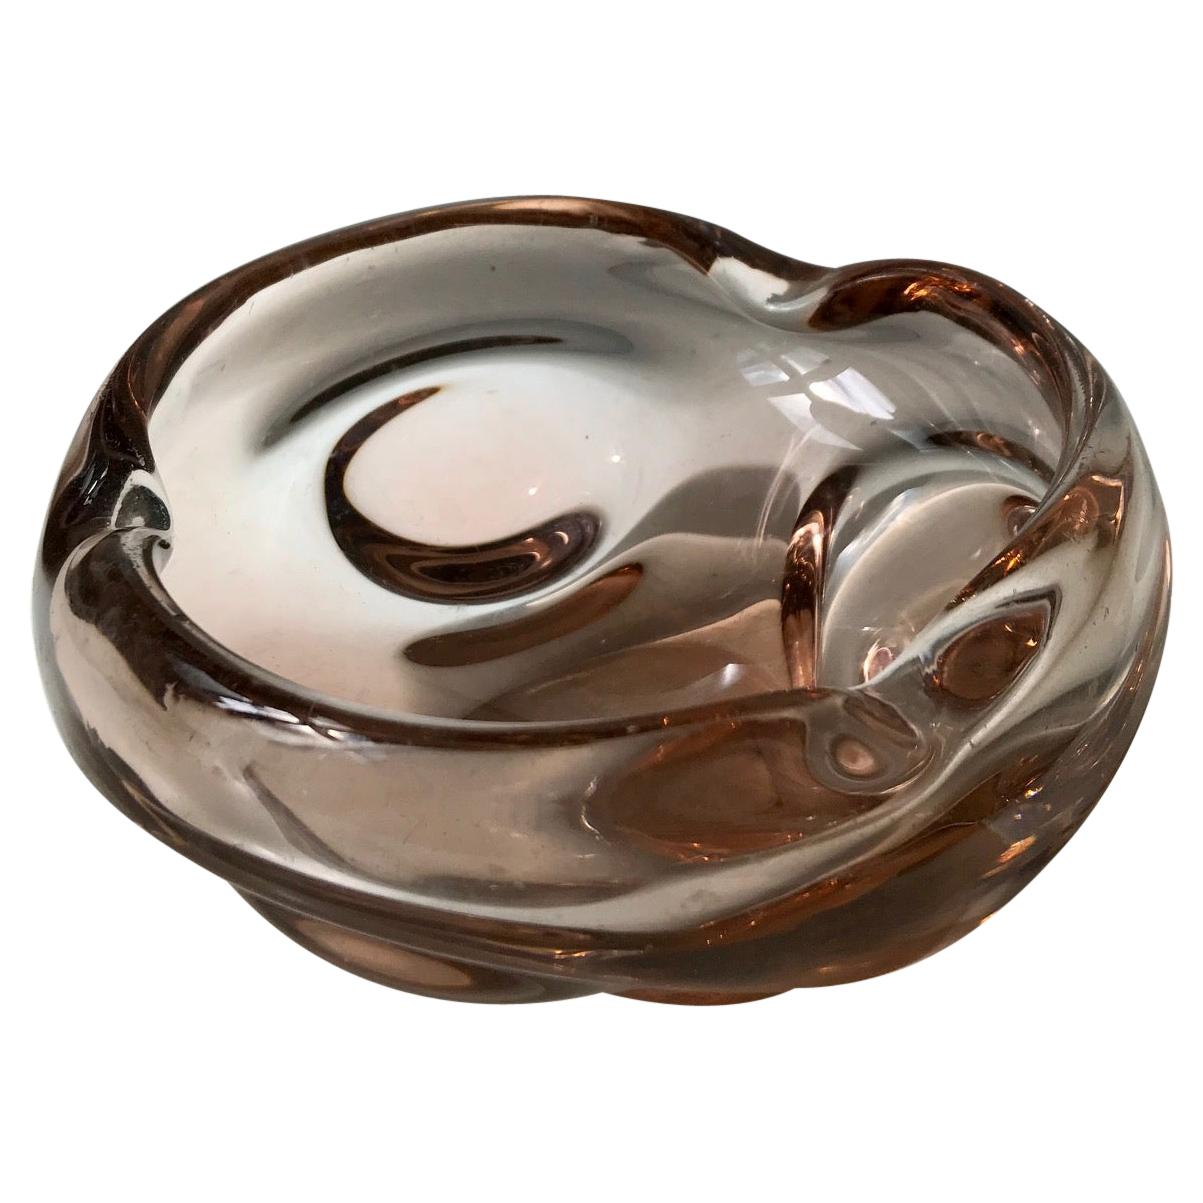 Elis Bergh Submerged Dish in Salmon Glass for Kosta, 1930s For Sale